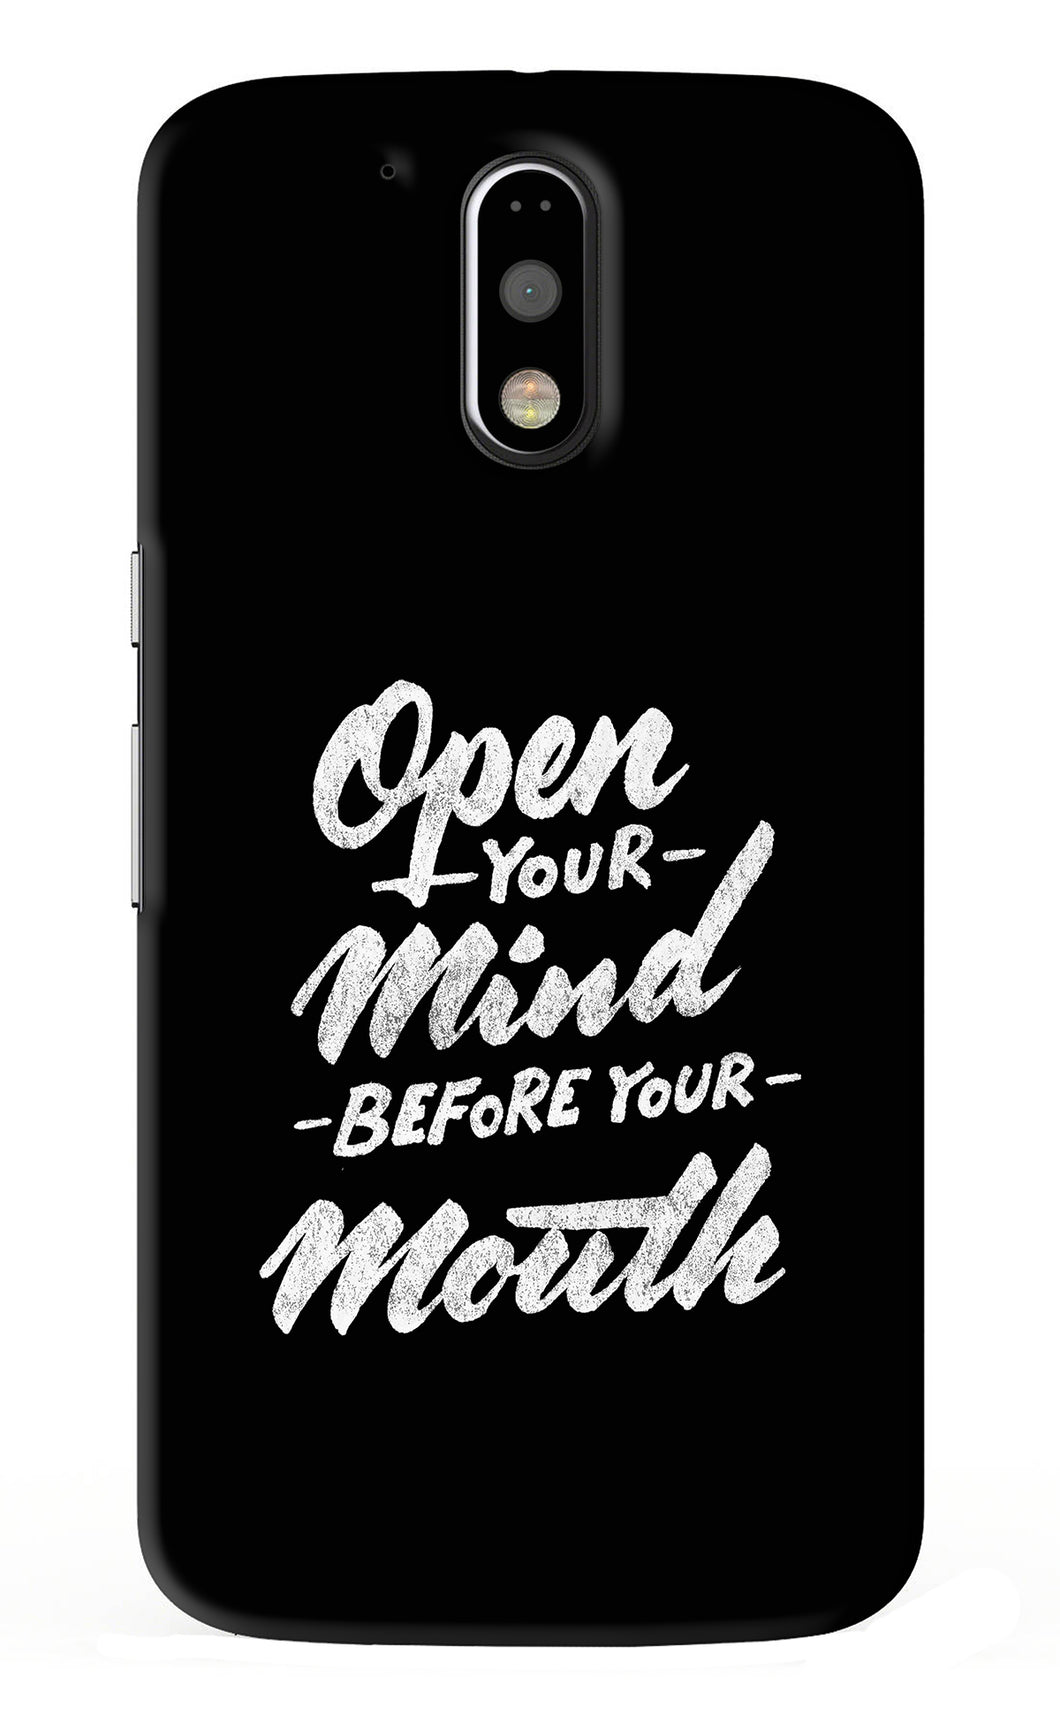 Open Your Mind Before Your Mouth Motorola Moto G4 Plus Back Skin Wrap